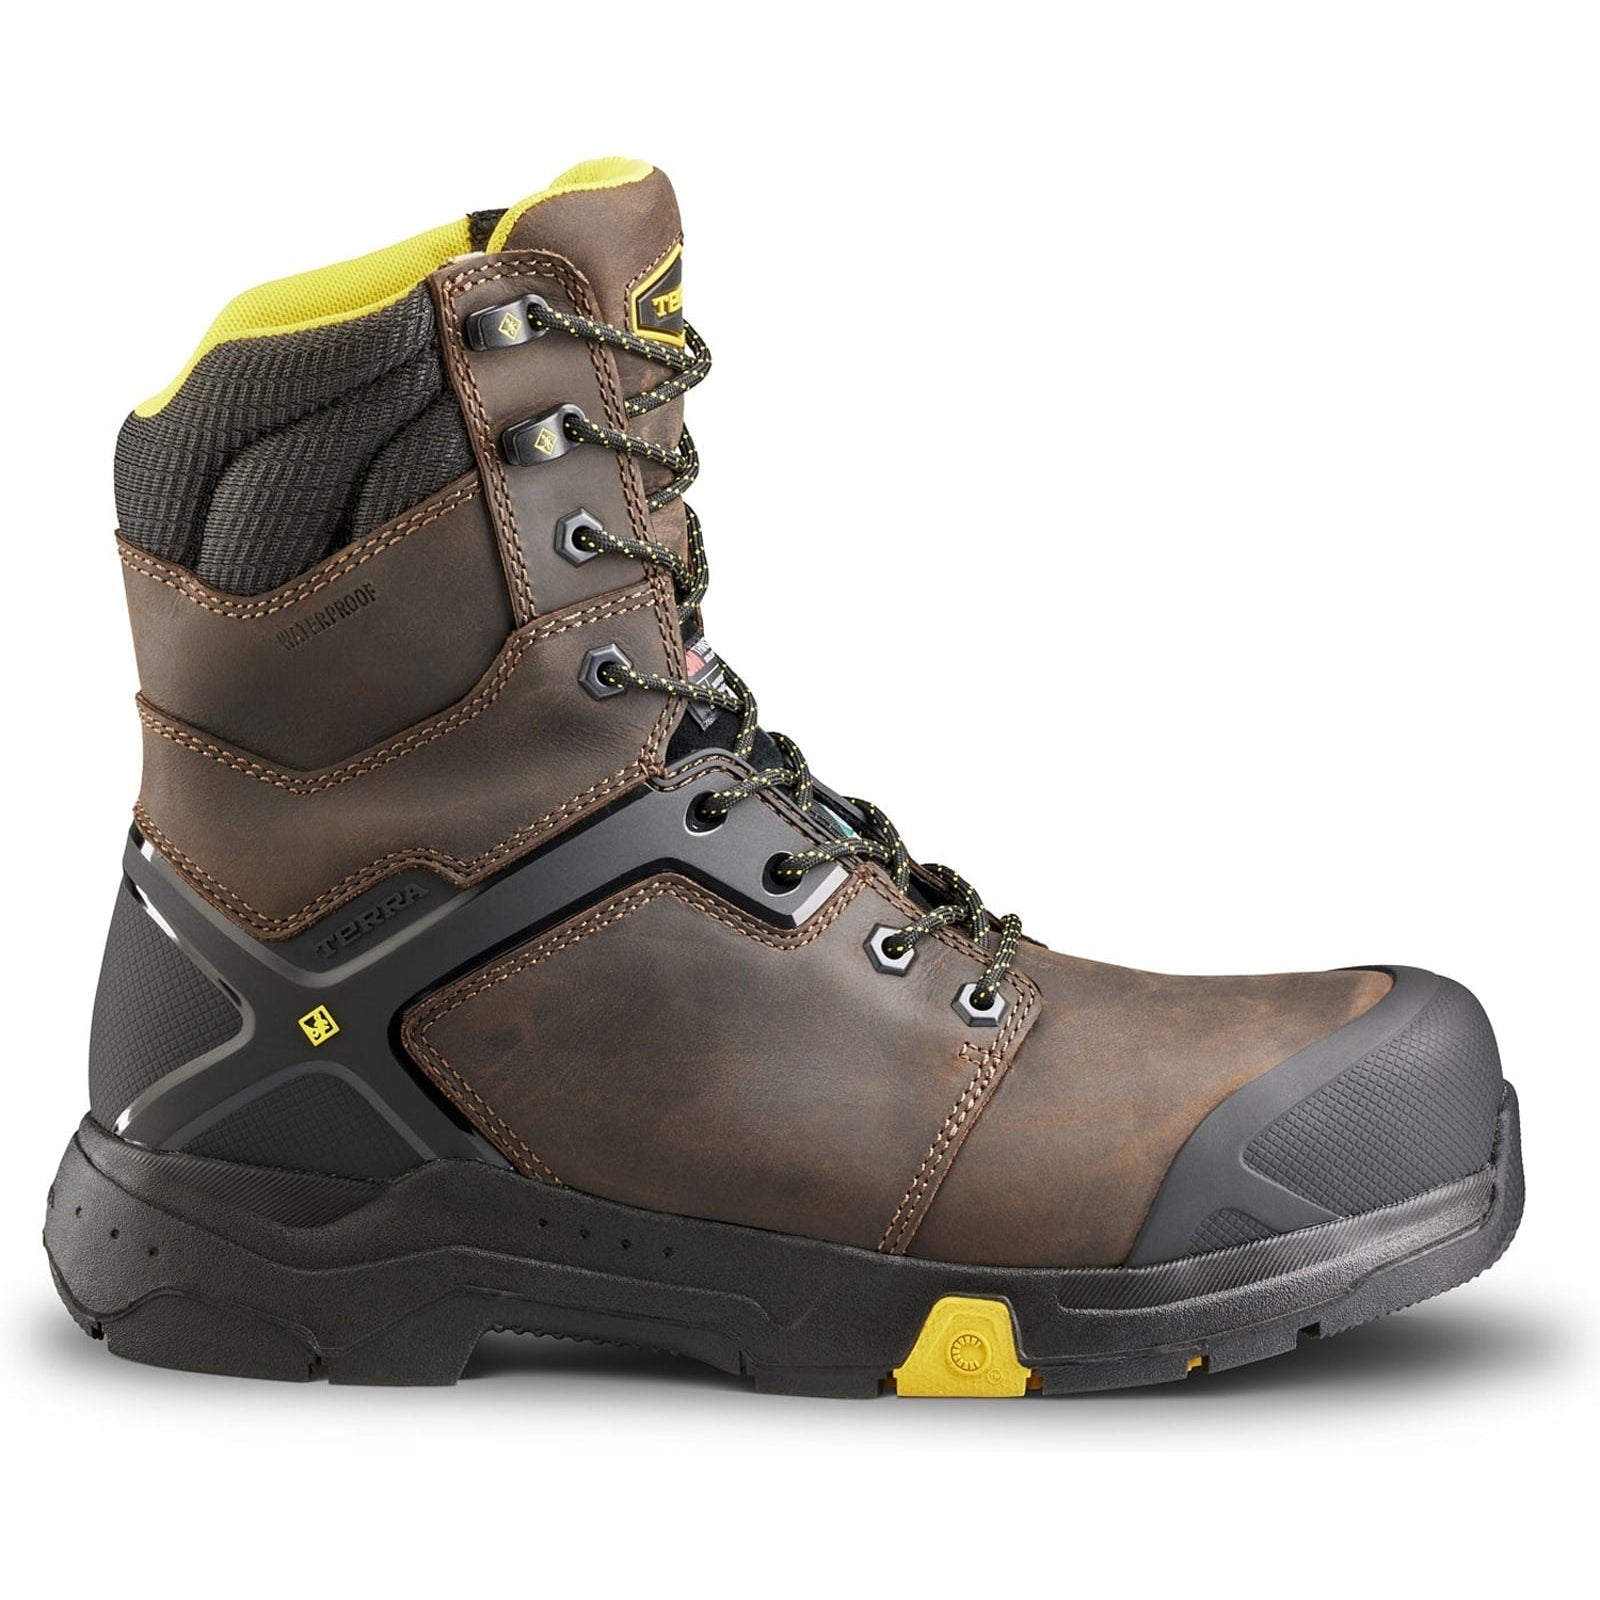 Terra Men's Carbine 8" Comp Toe WP Safety  Work Boot -Brown- 4TCRBN 7 / Medium / Brown - Overlook Boots